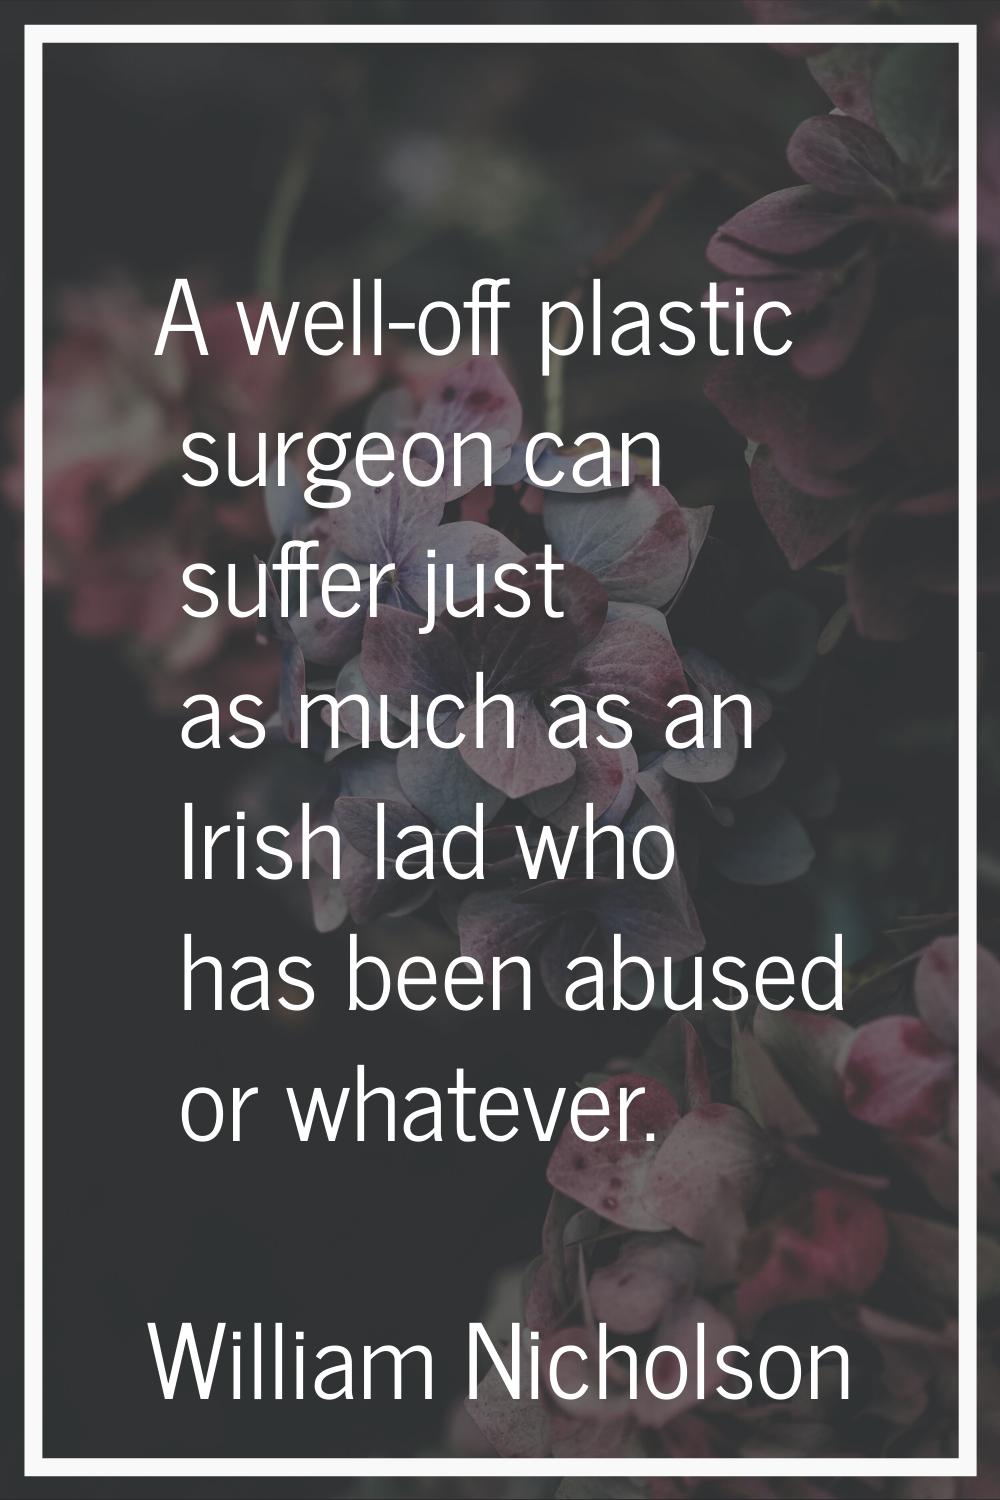 A well-off plastic surgeon can suffer just as much as an Irish lad who has been abused or whatever.